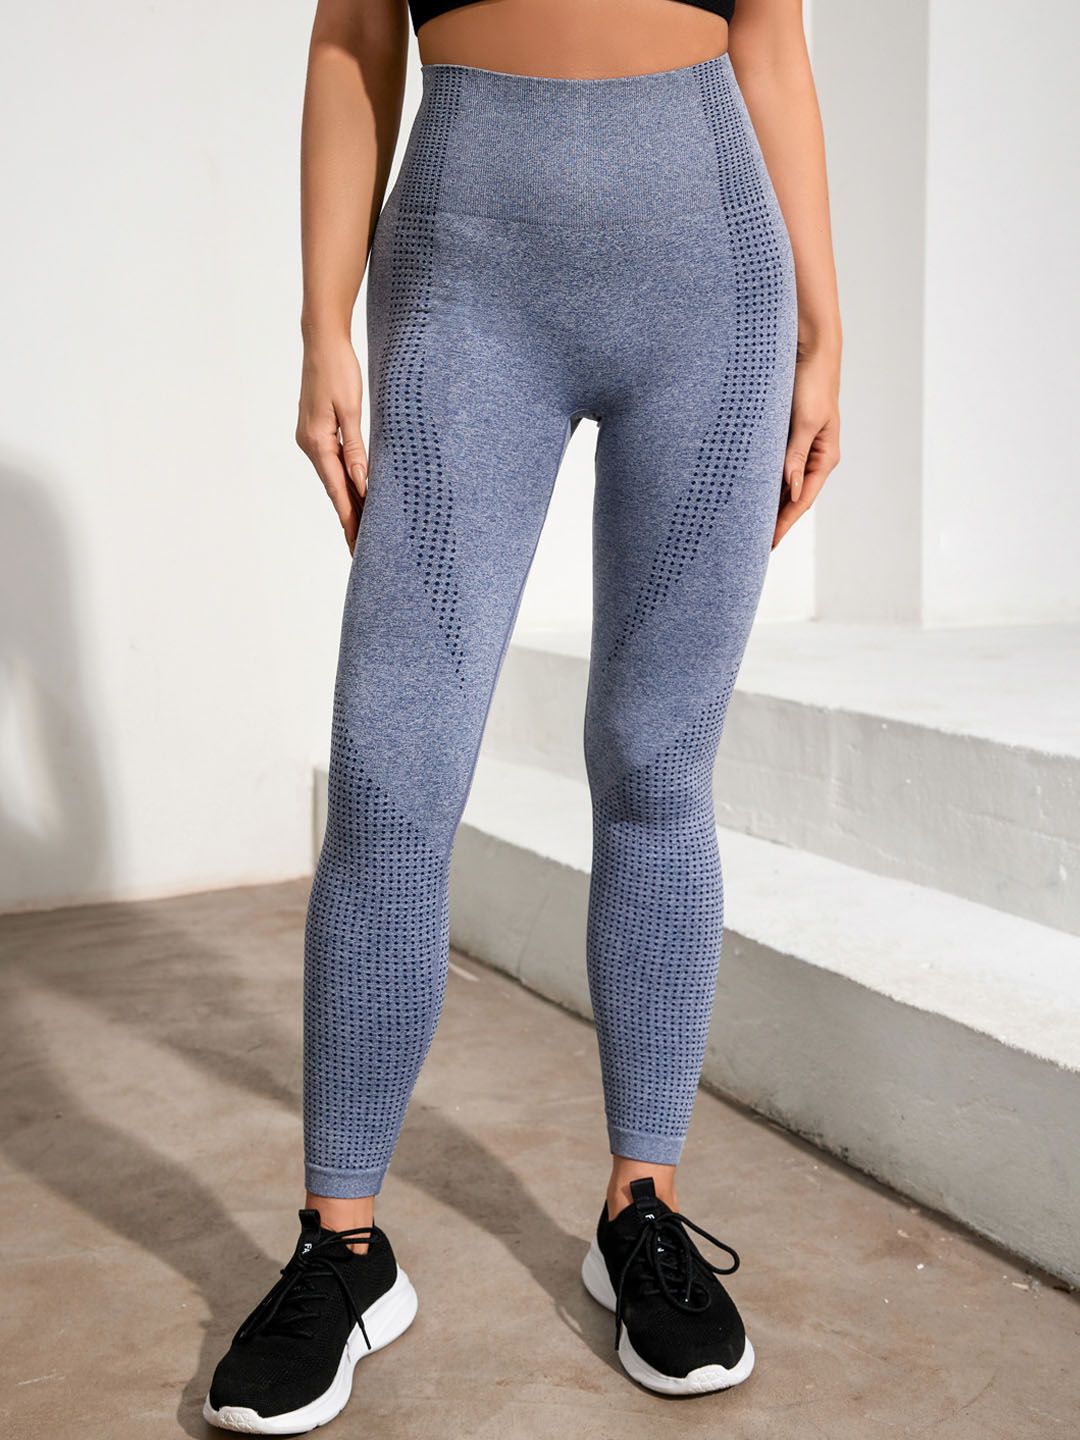 URBANIC Women Grey Patterned Ankle Length Training & Gym Tights Price in India